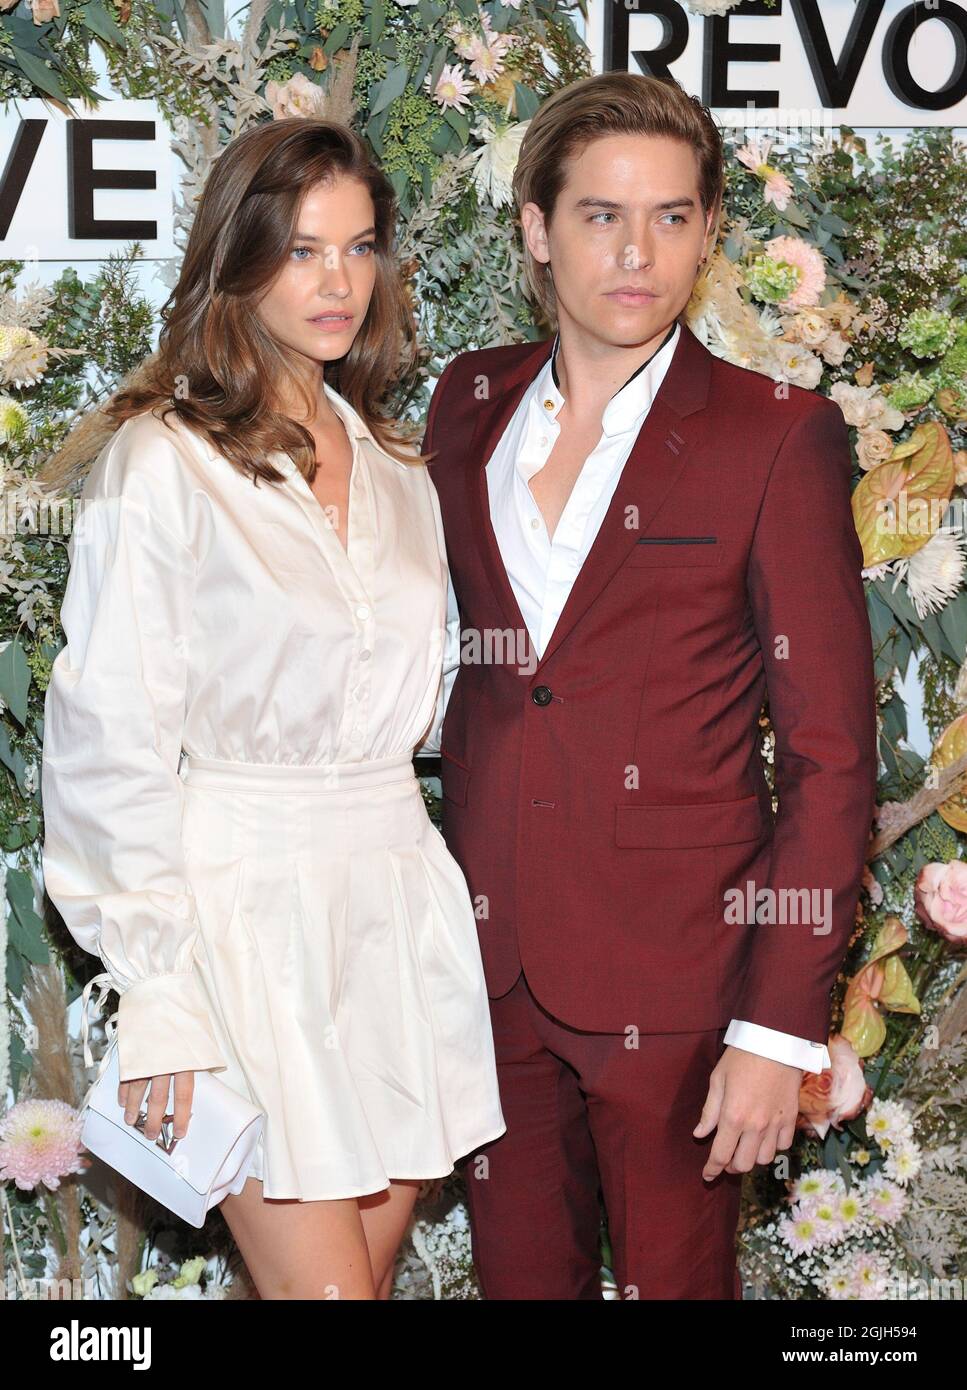 L-R: Barbara Palvin and Dylan Sprouse attend the Revolve Gallery fashion  experience opening at Revolve Gallery in New York, NY on September 9, 2021.  (Photo by Stephen Smith/SIPA USA) Credit: Sipa US/Alamy